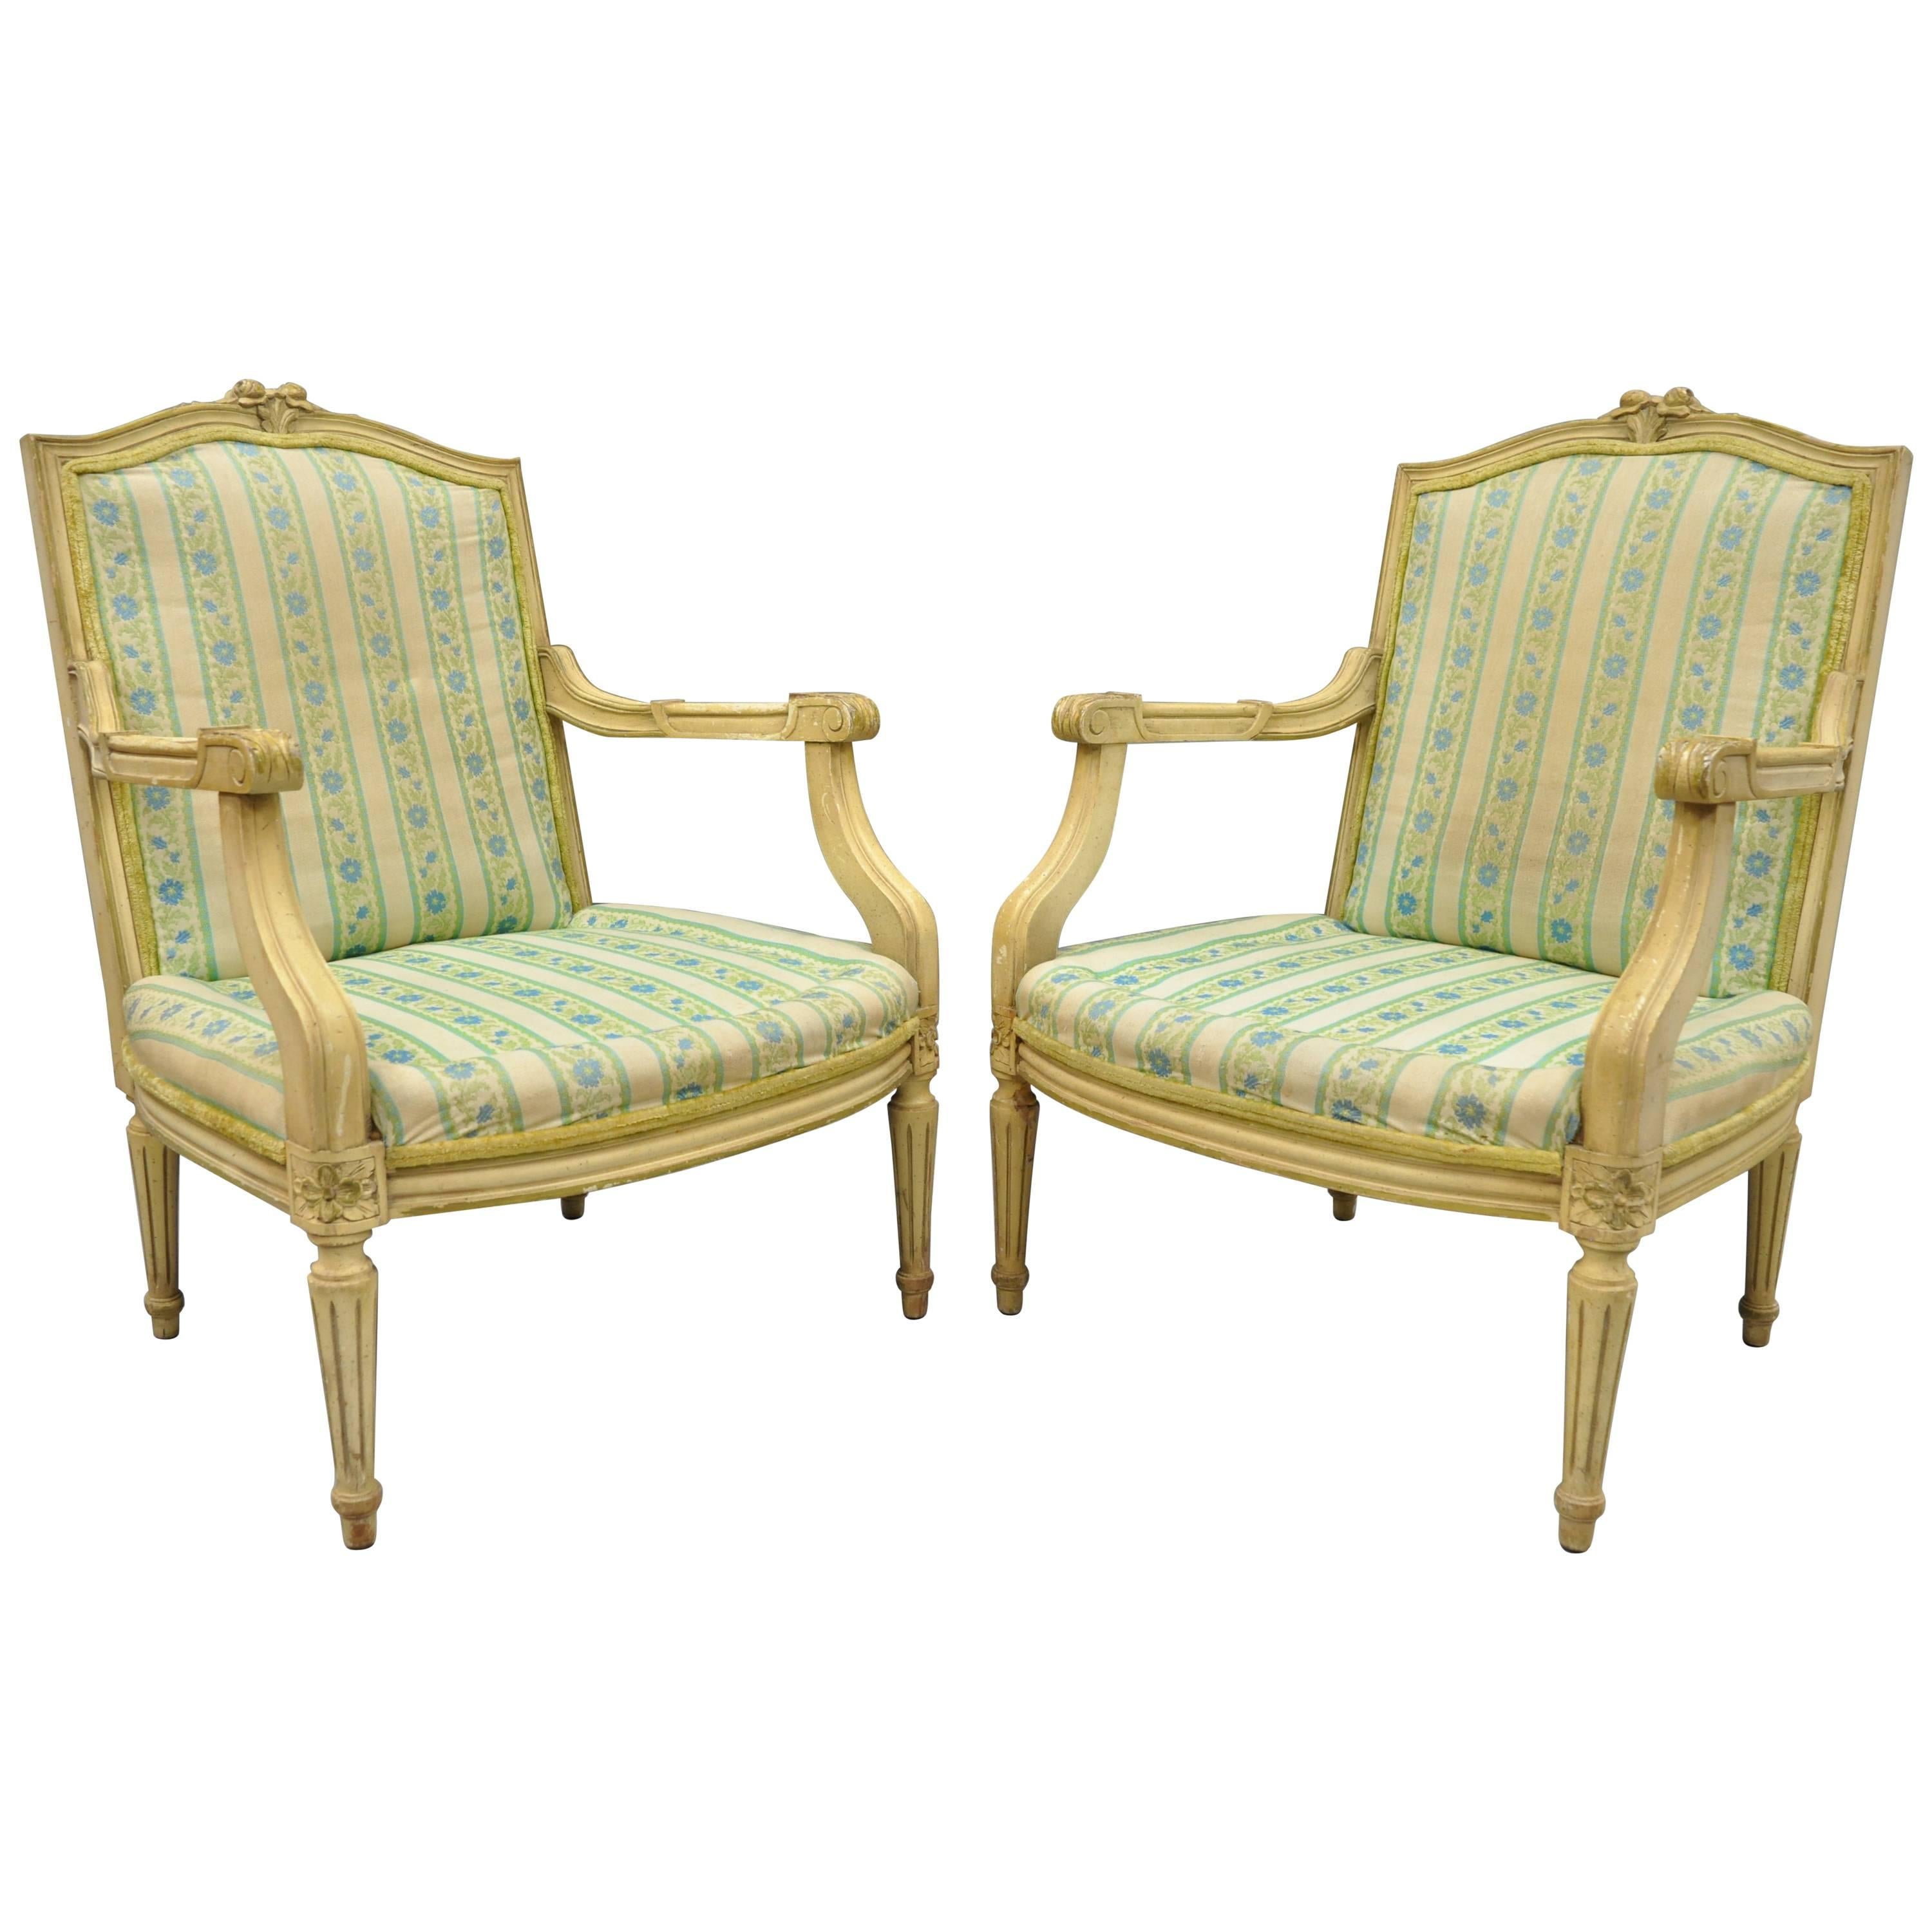 Pair of French Louis XVI Provincial Style Cream Painted Armchairs Fauteuils